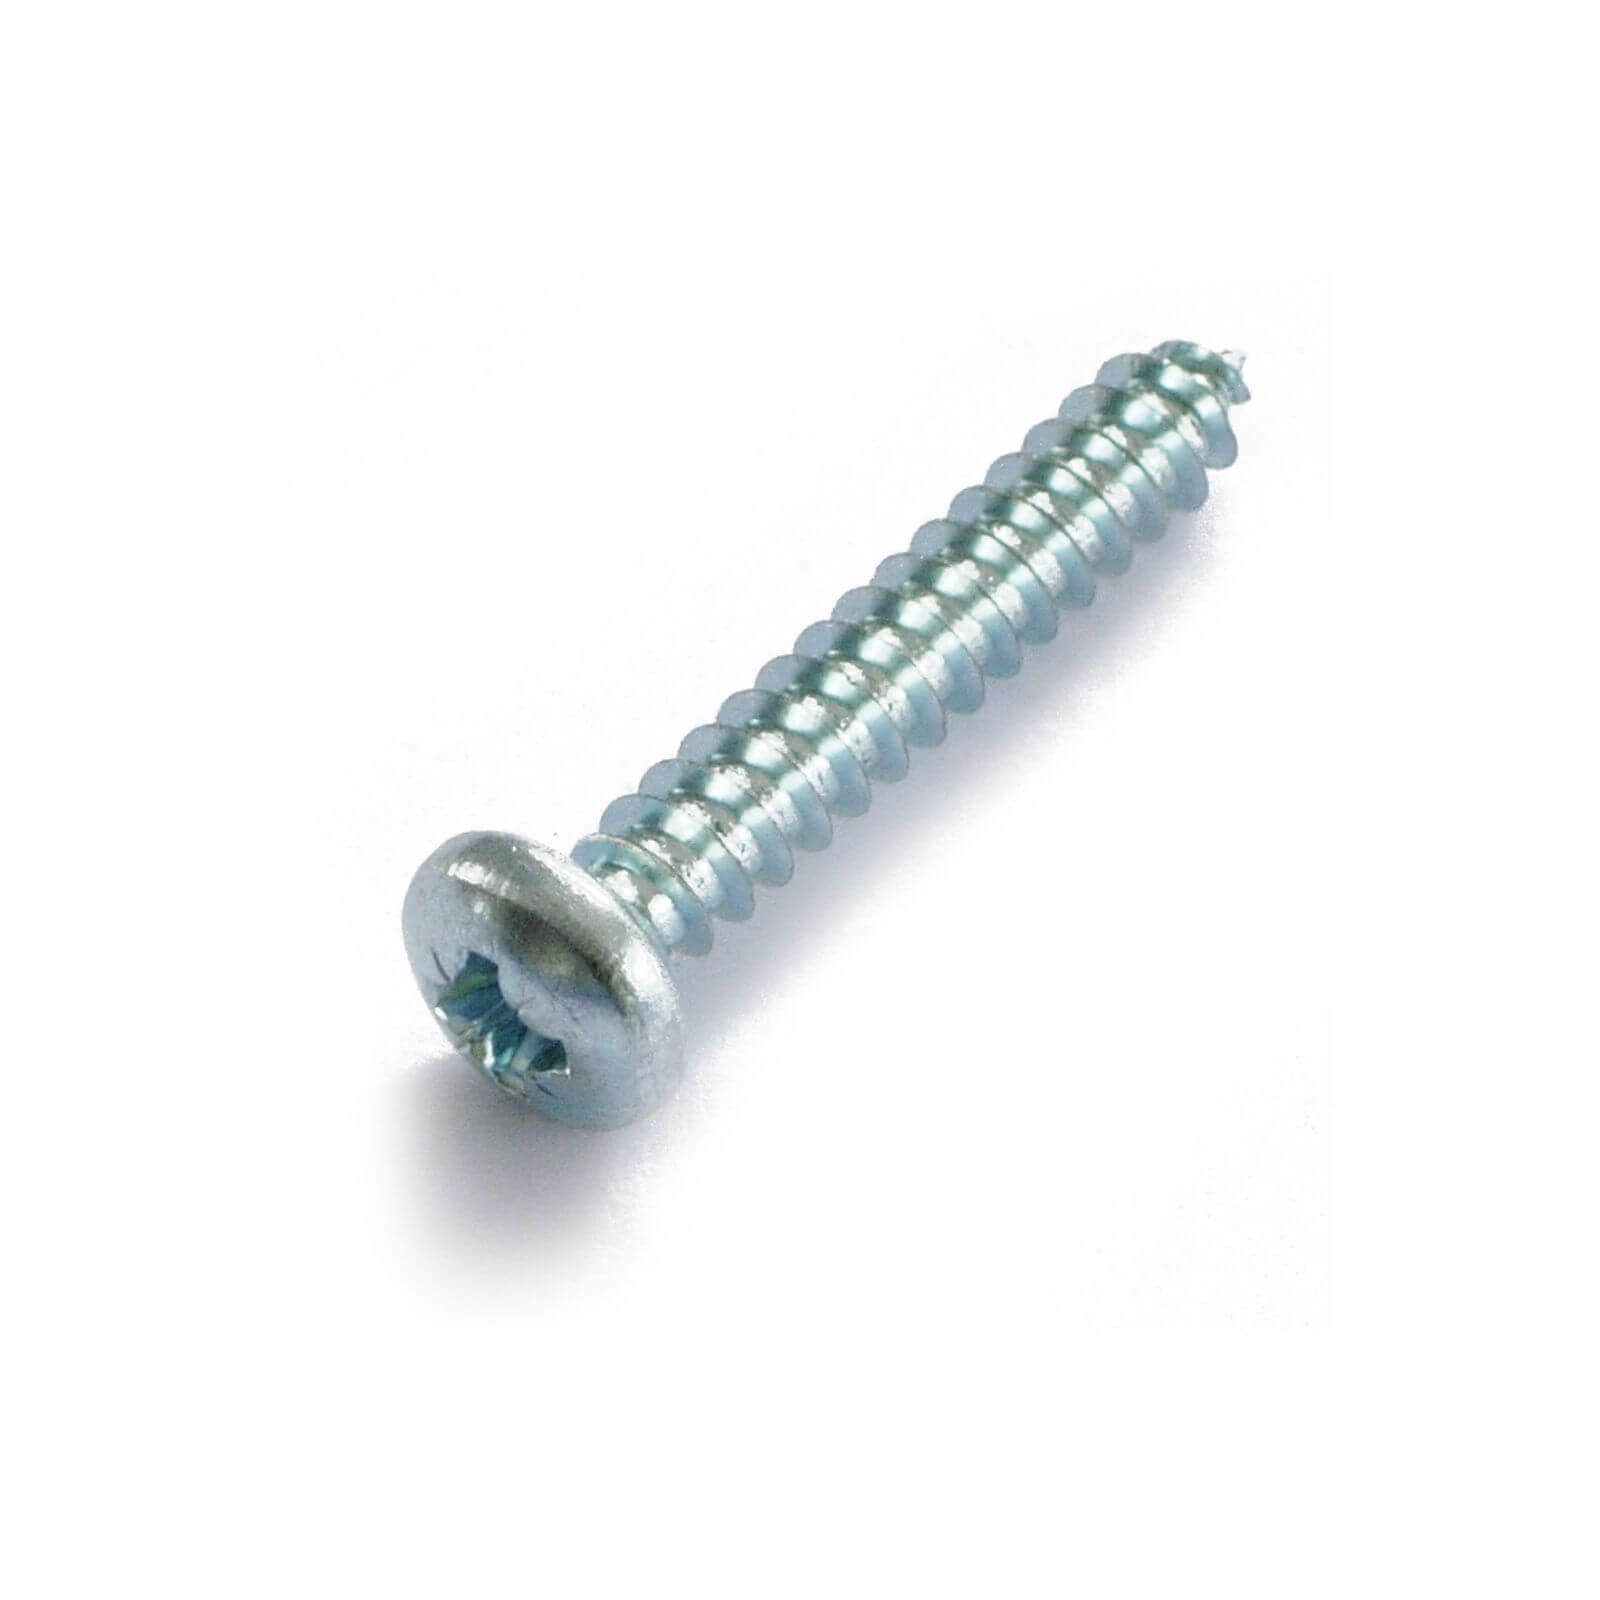 Self Tapping Screw - Bright Zinc Plated - 5 x 25mm - 10 Pack